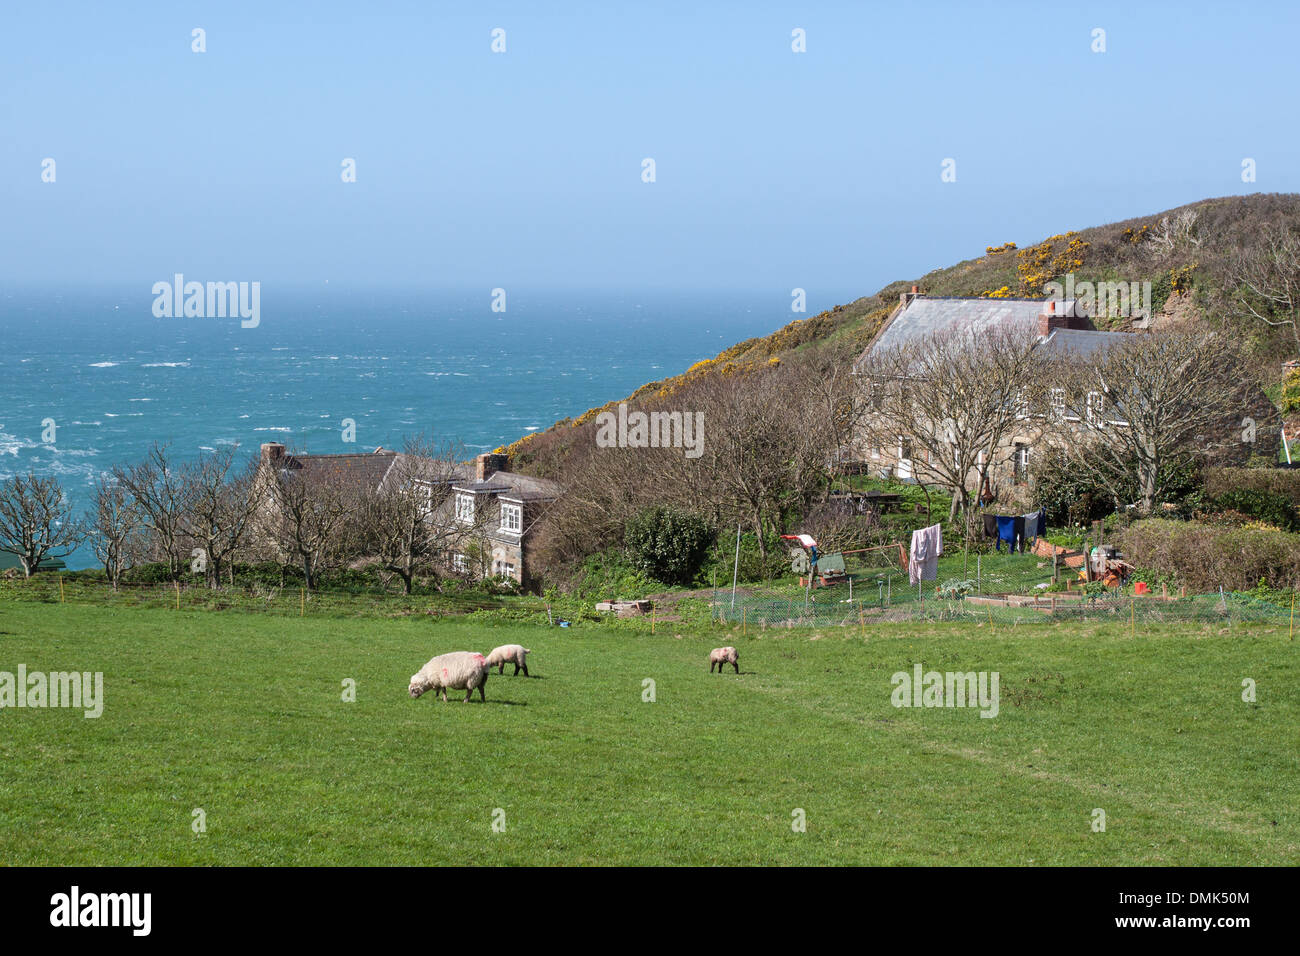 SARK COUNTRYSIDE BY THE SEA, ISLAND OF SARK, CHANNEL ISLANDS Stock Photo